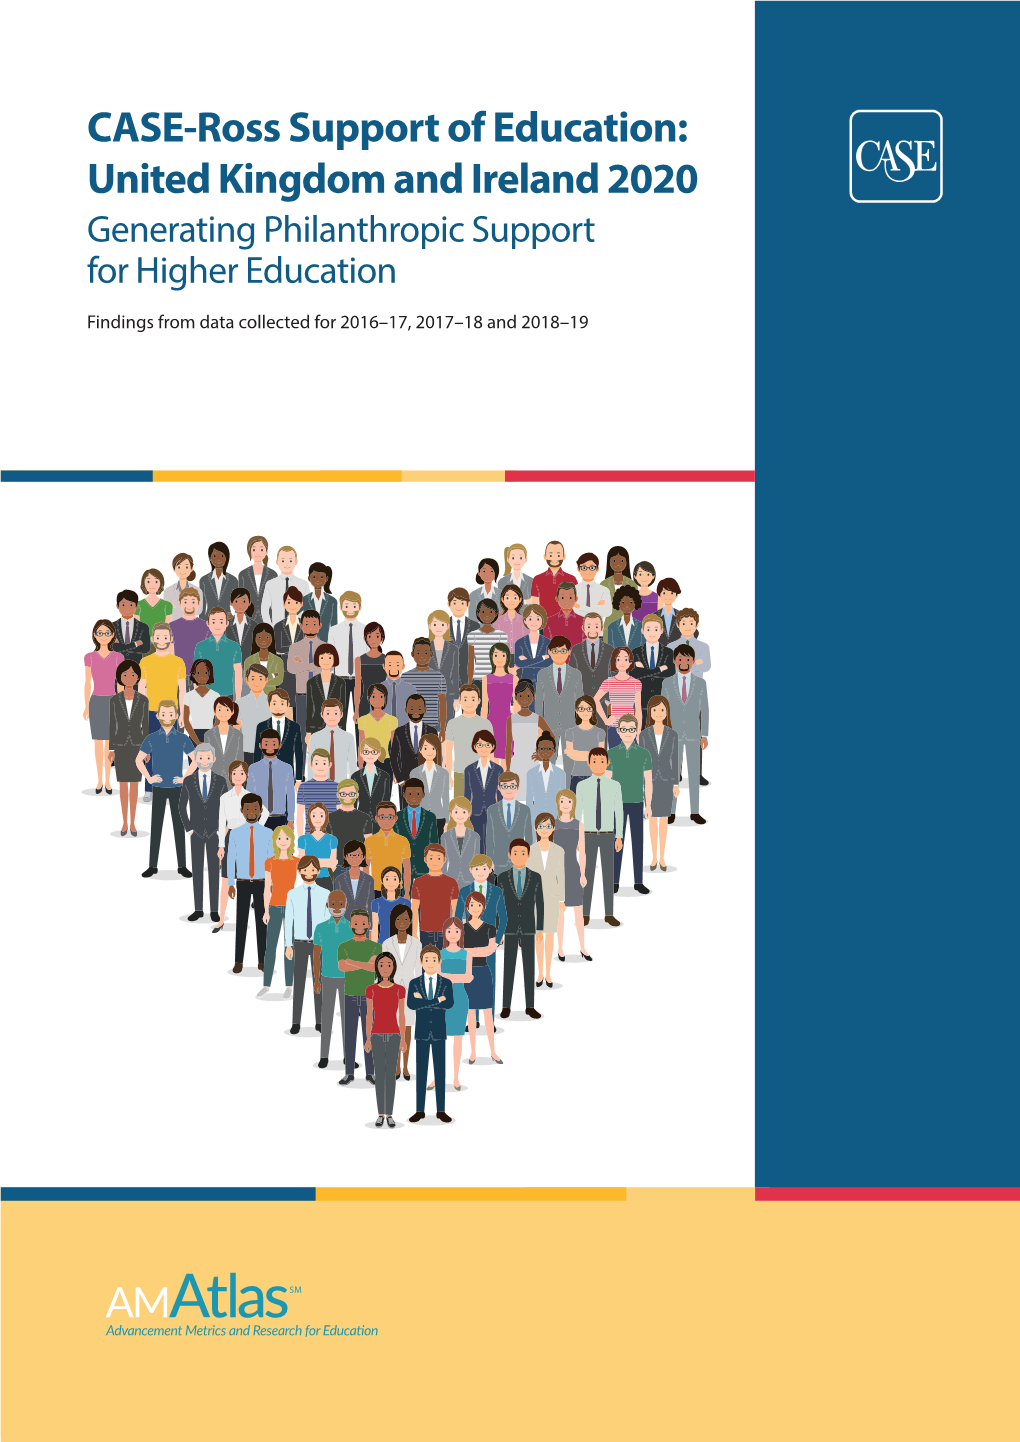 CASE-Ross Support of Education: United Kingdom and Ireland 2020 Generating Philanthropic Support for Higher Education